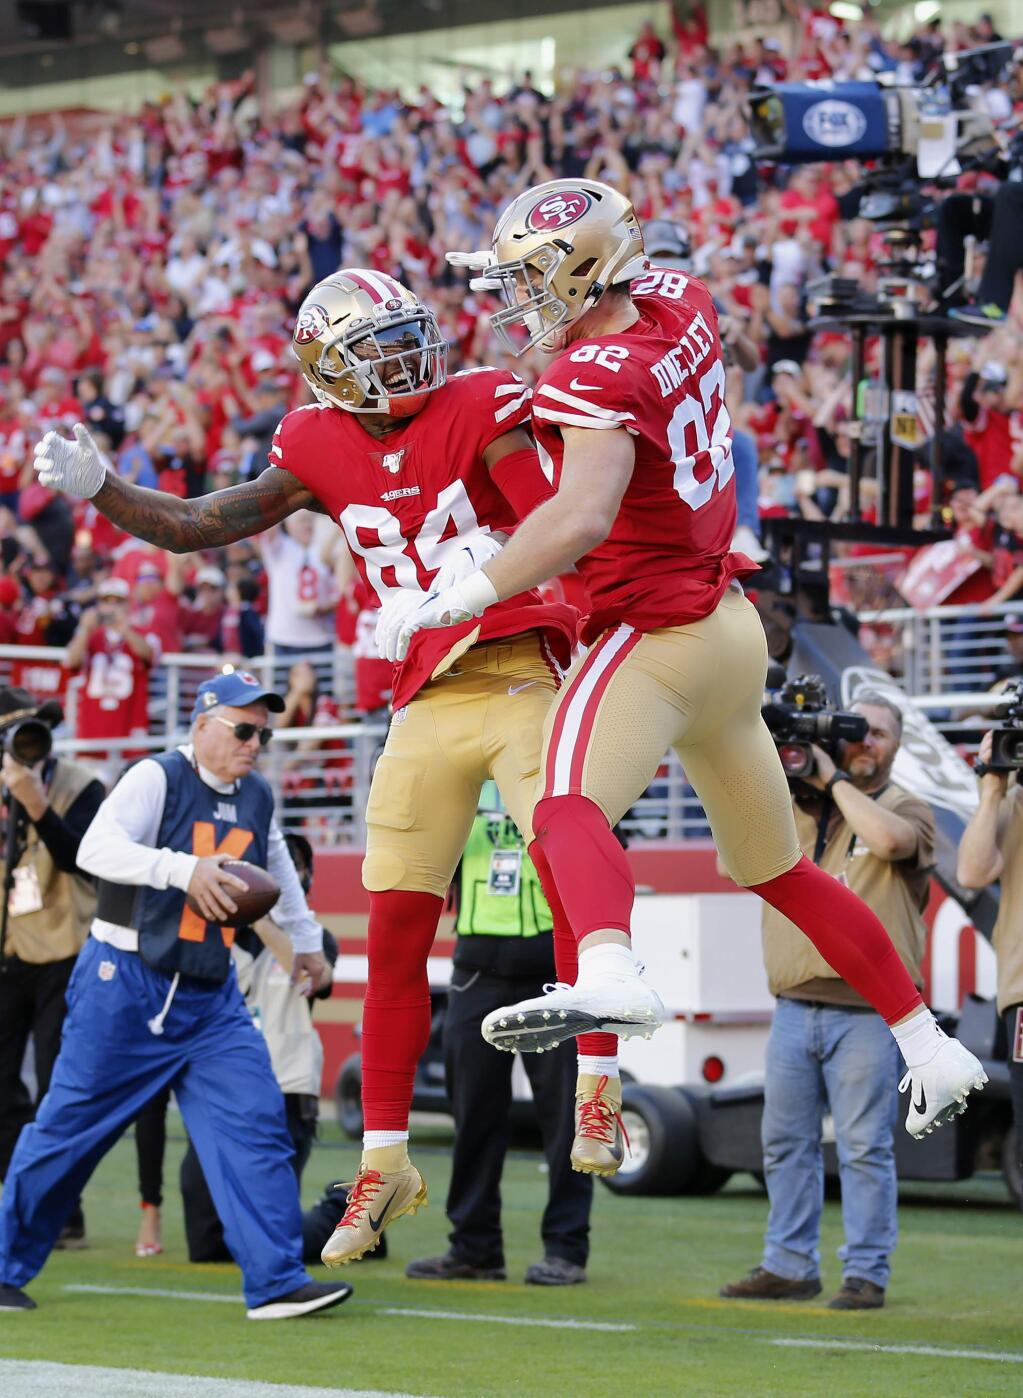 San Francisco 49ers tight end Ross Dwelley, right, is congratulated by wide receiver Kendrick Bourne after scoring against the Arizona Cardinals during the first half of an NFL football game in Santa Clara, Calif., Sunday, Nov. 17, 2019. (AP Photo/Josie Lepe)